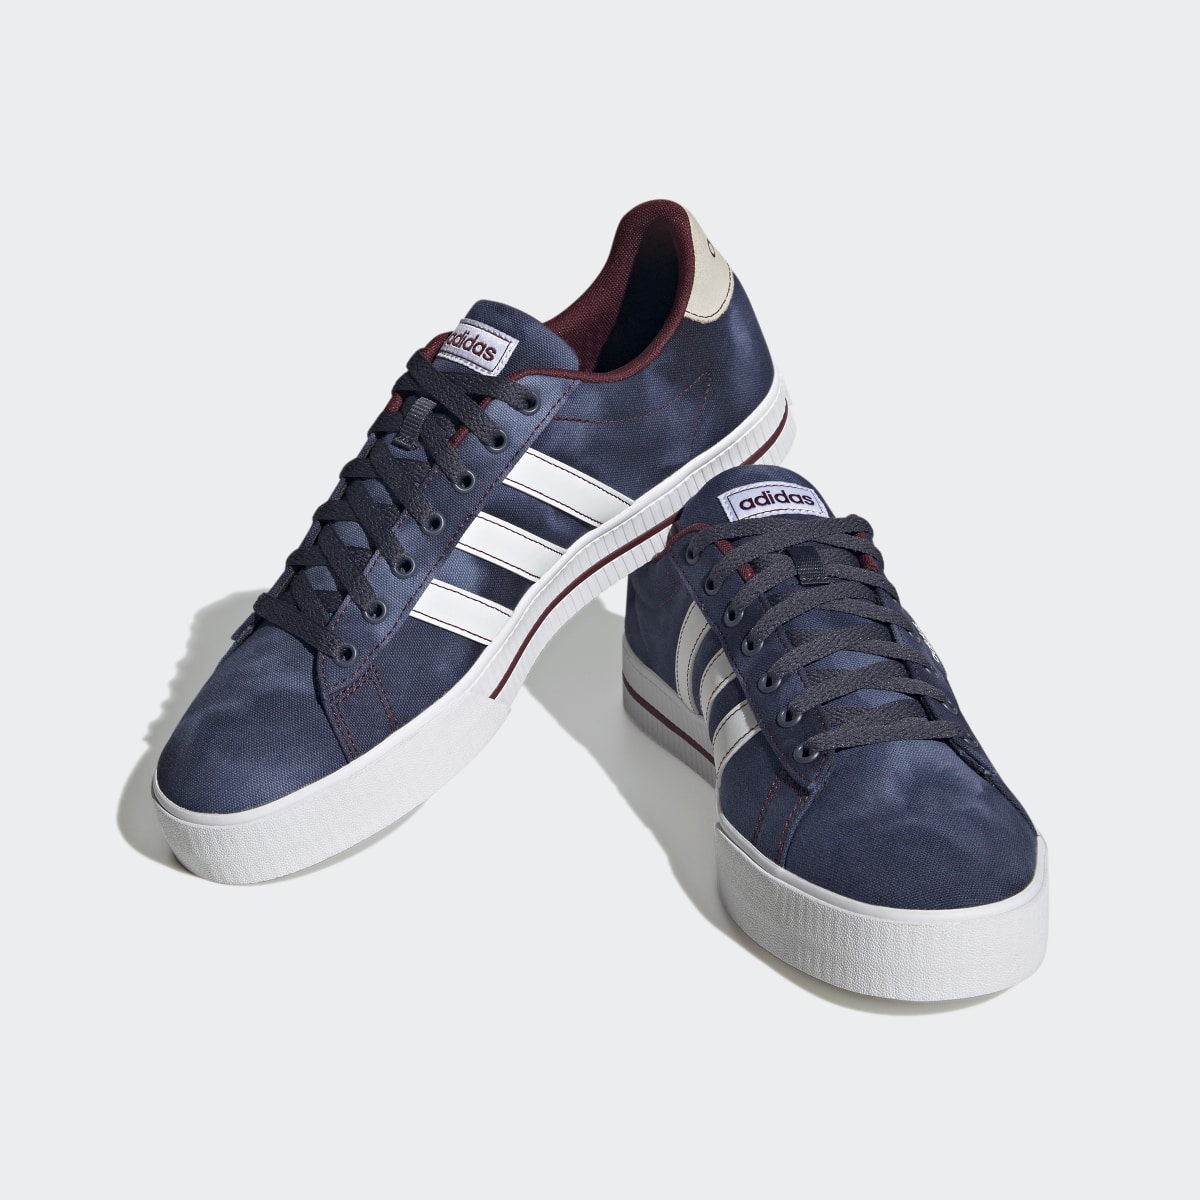 Adidas Daily 3.0 Lifestyle Skateboarding Suede Shoes. 5